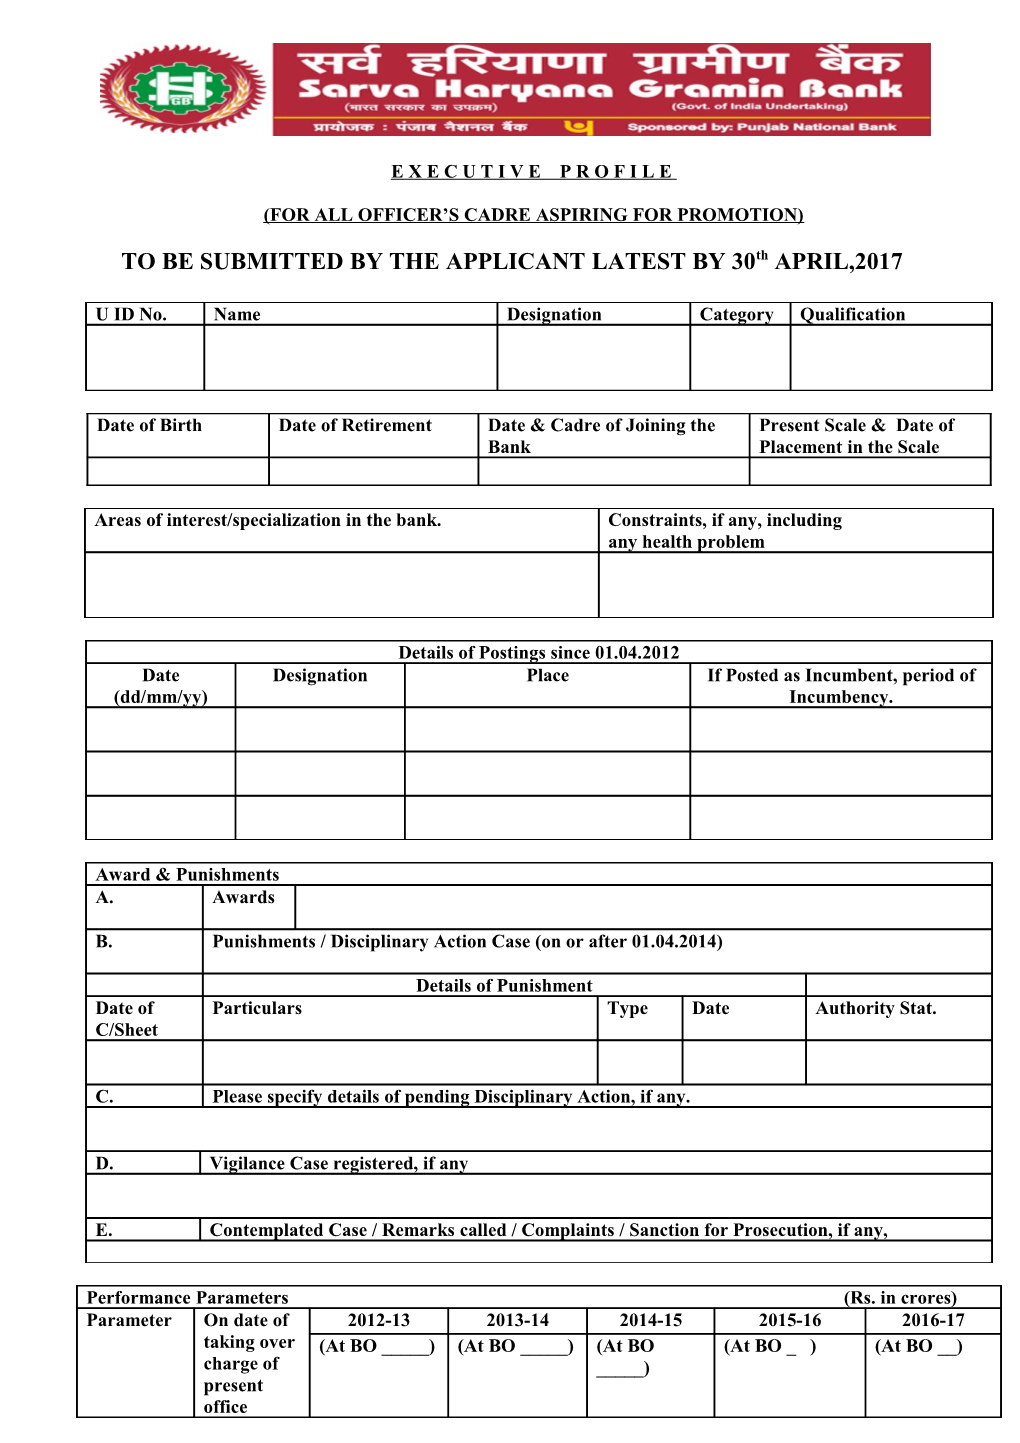 TO BE SUBMITTED by the APPLICANT LATEST by 30Th APRIL,2017